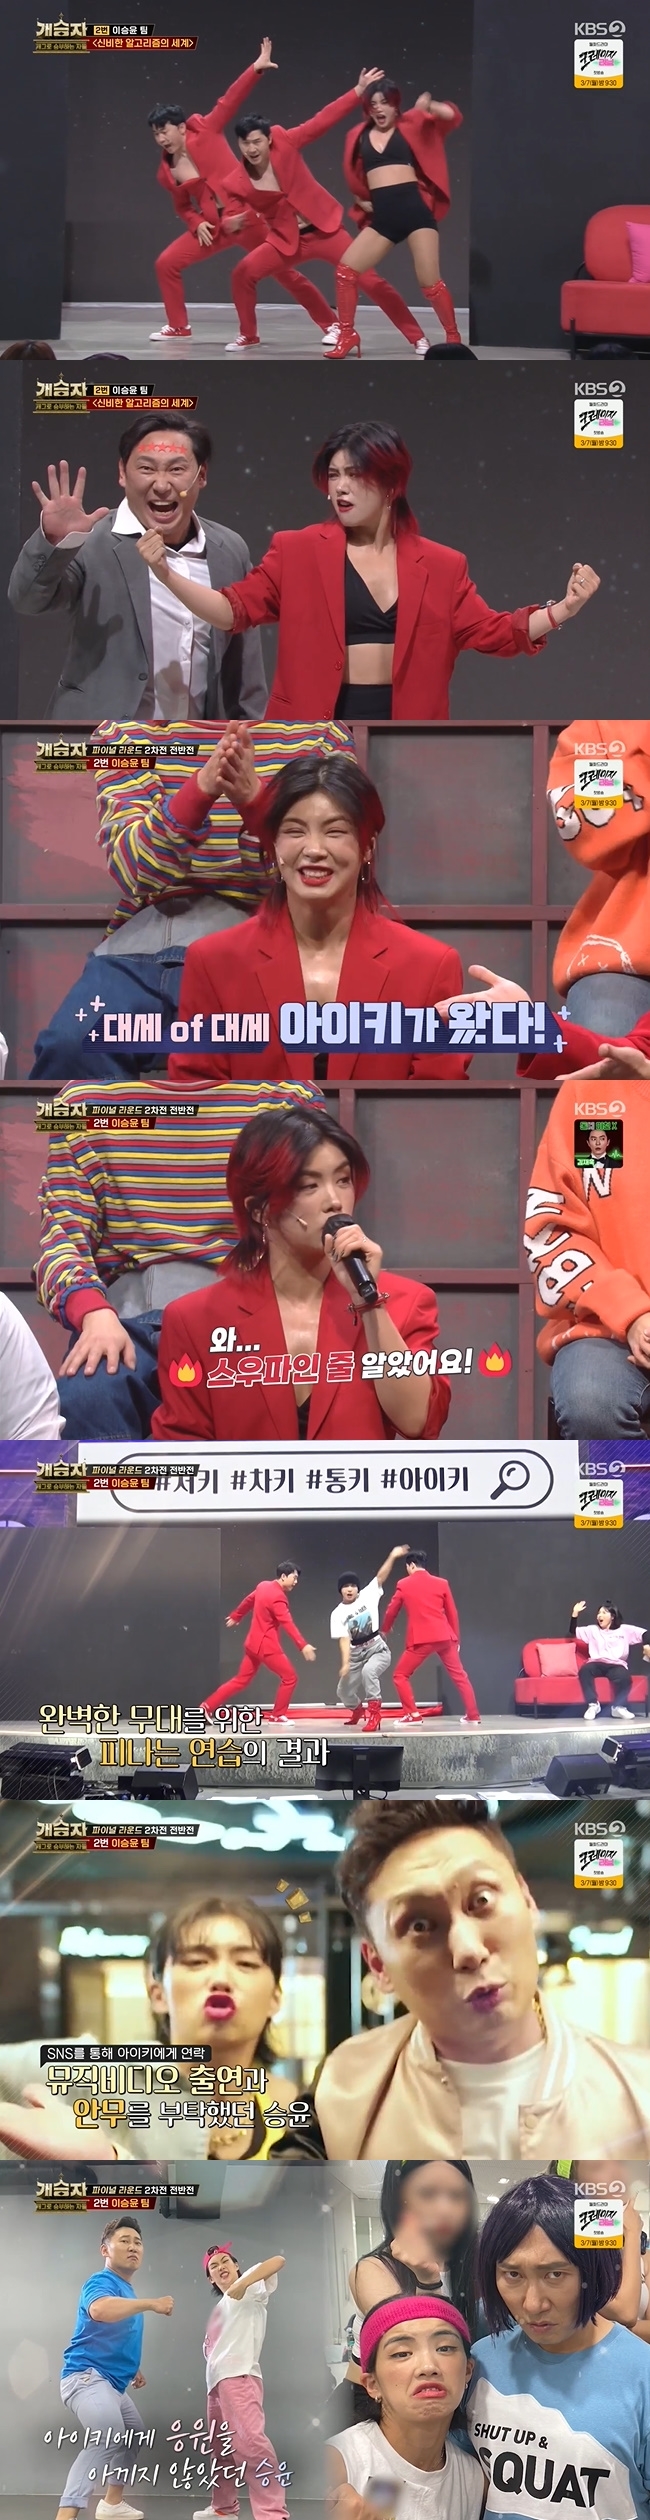 Aiki appeared as a Wild card for Lee Seung-Yoon, who had already recognized his value.On February 19, KBS 2TV Winners & Losers, Aiki showed his presence in the second round of the final round and fired Lee Seung-Yoon.Lee Seung-Yoon, 33 points clear of second-placed toilet-sider team, chose A I-ki as a Wild card with a powerful shot to net in the second leg.Lee Seung-Yoon said, I am a hot friend now, and I have known him before. He said, I should do it.Our team is a real all-time team. Im not sure.Lee Seung-Yoon, who showed full confidence that Jill himself, parodied Jesse, Queen, Harlequin, movie Matrix, Kim Hye-soo, Lee Jung-jae, Chucky and Tongki through the World of Mysterious Algorithms corner.When Aiki appeared, cheers burst out in the audience, and Aiki showed her presence and showed charismatic dances with Lee Sang-ho and Lee Sang-mins twin brothers.I thought it was Sfa. I was so passionate, he said, (Twin Brothers) were really good at it. You have good choreography skills. It was so fun.When asked about his relationship with Aiki, Lee Seung-Yoon said, I wrote a song called Shut Up and Squat and I contacted him separately. I want to shoot a music video together.